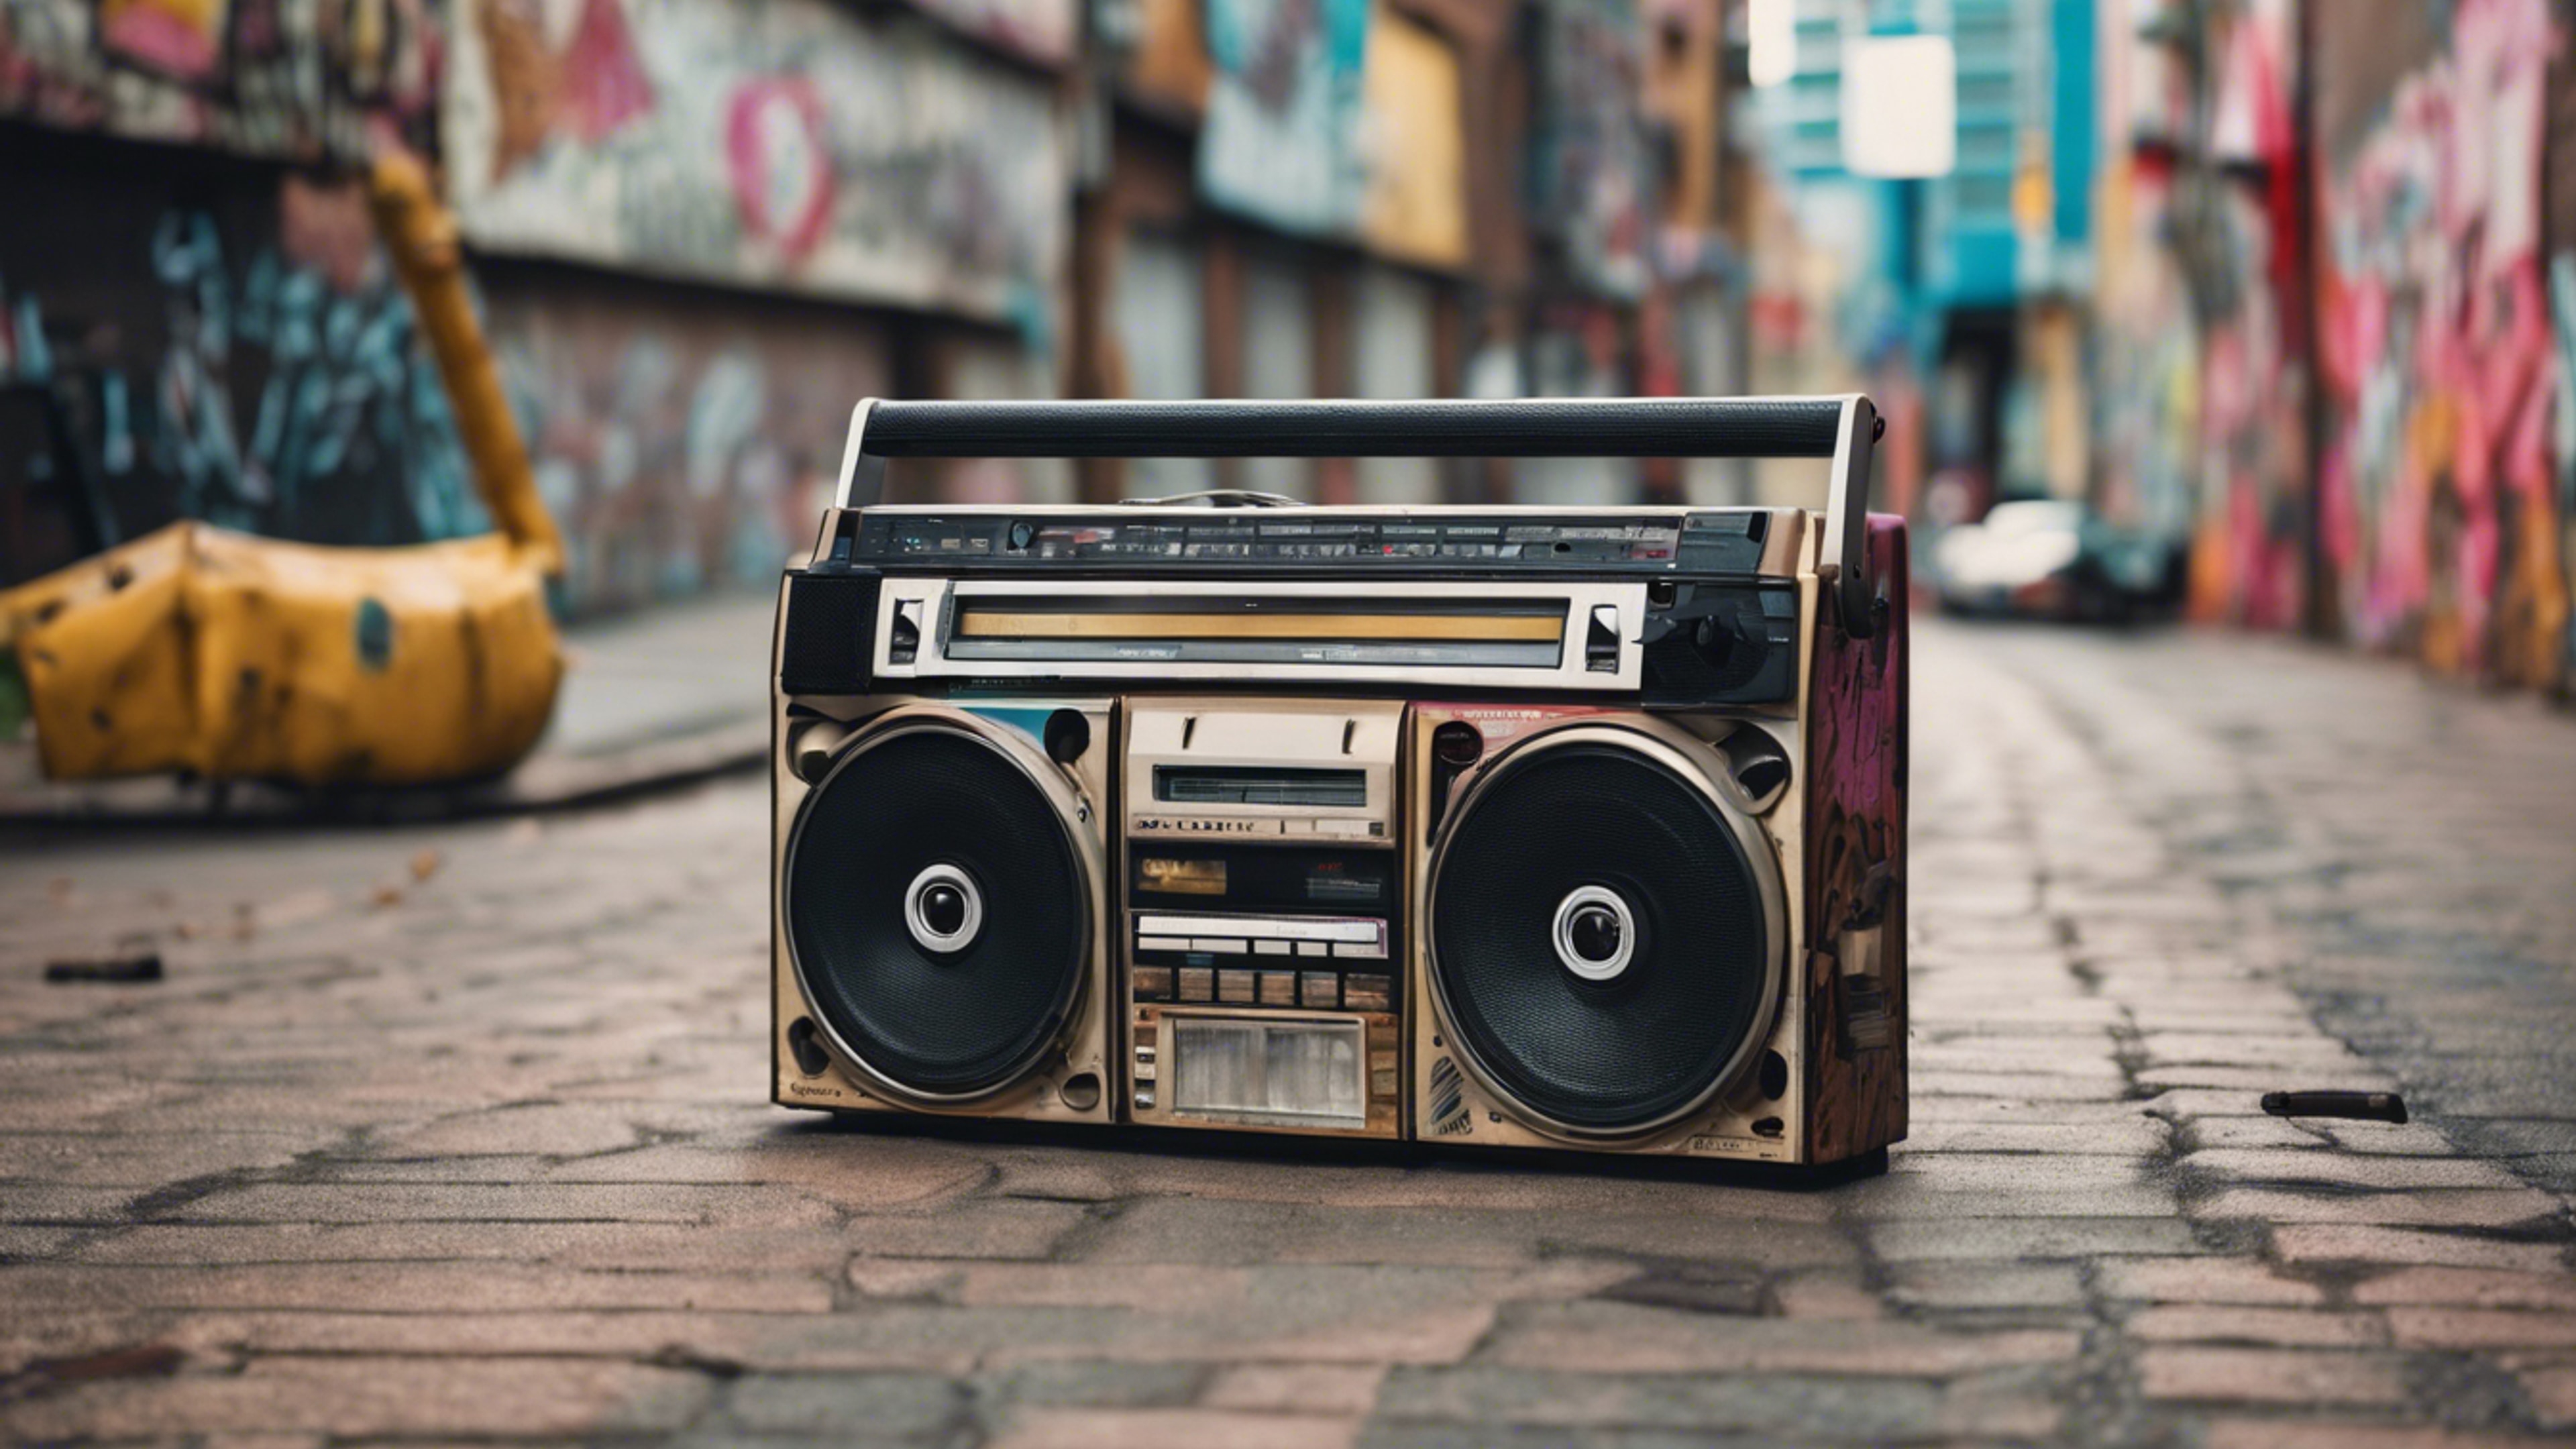 An old school 80s boombox playing cassette tapes on a graffitied street. Tapetai[63e13512f9e44708b5c0]